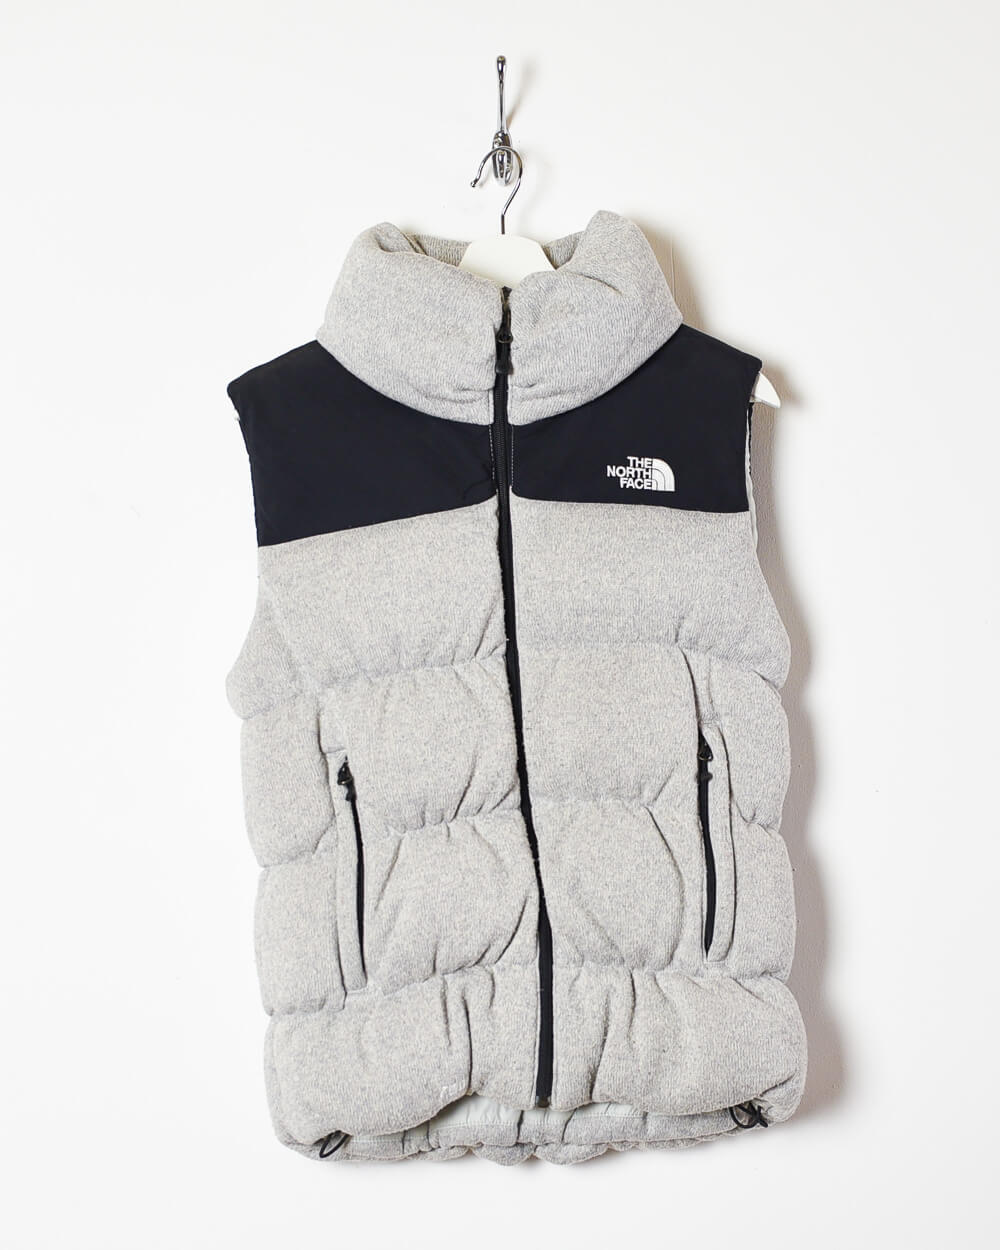 Stone The North Face Women's Gilet - Large